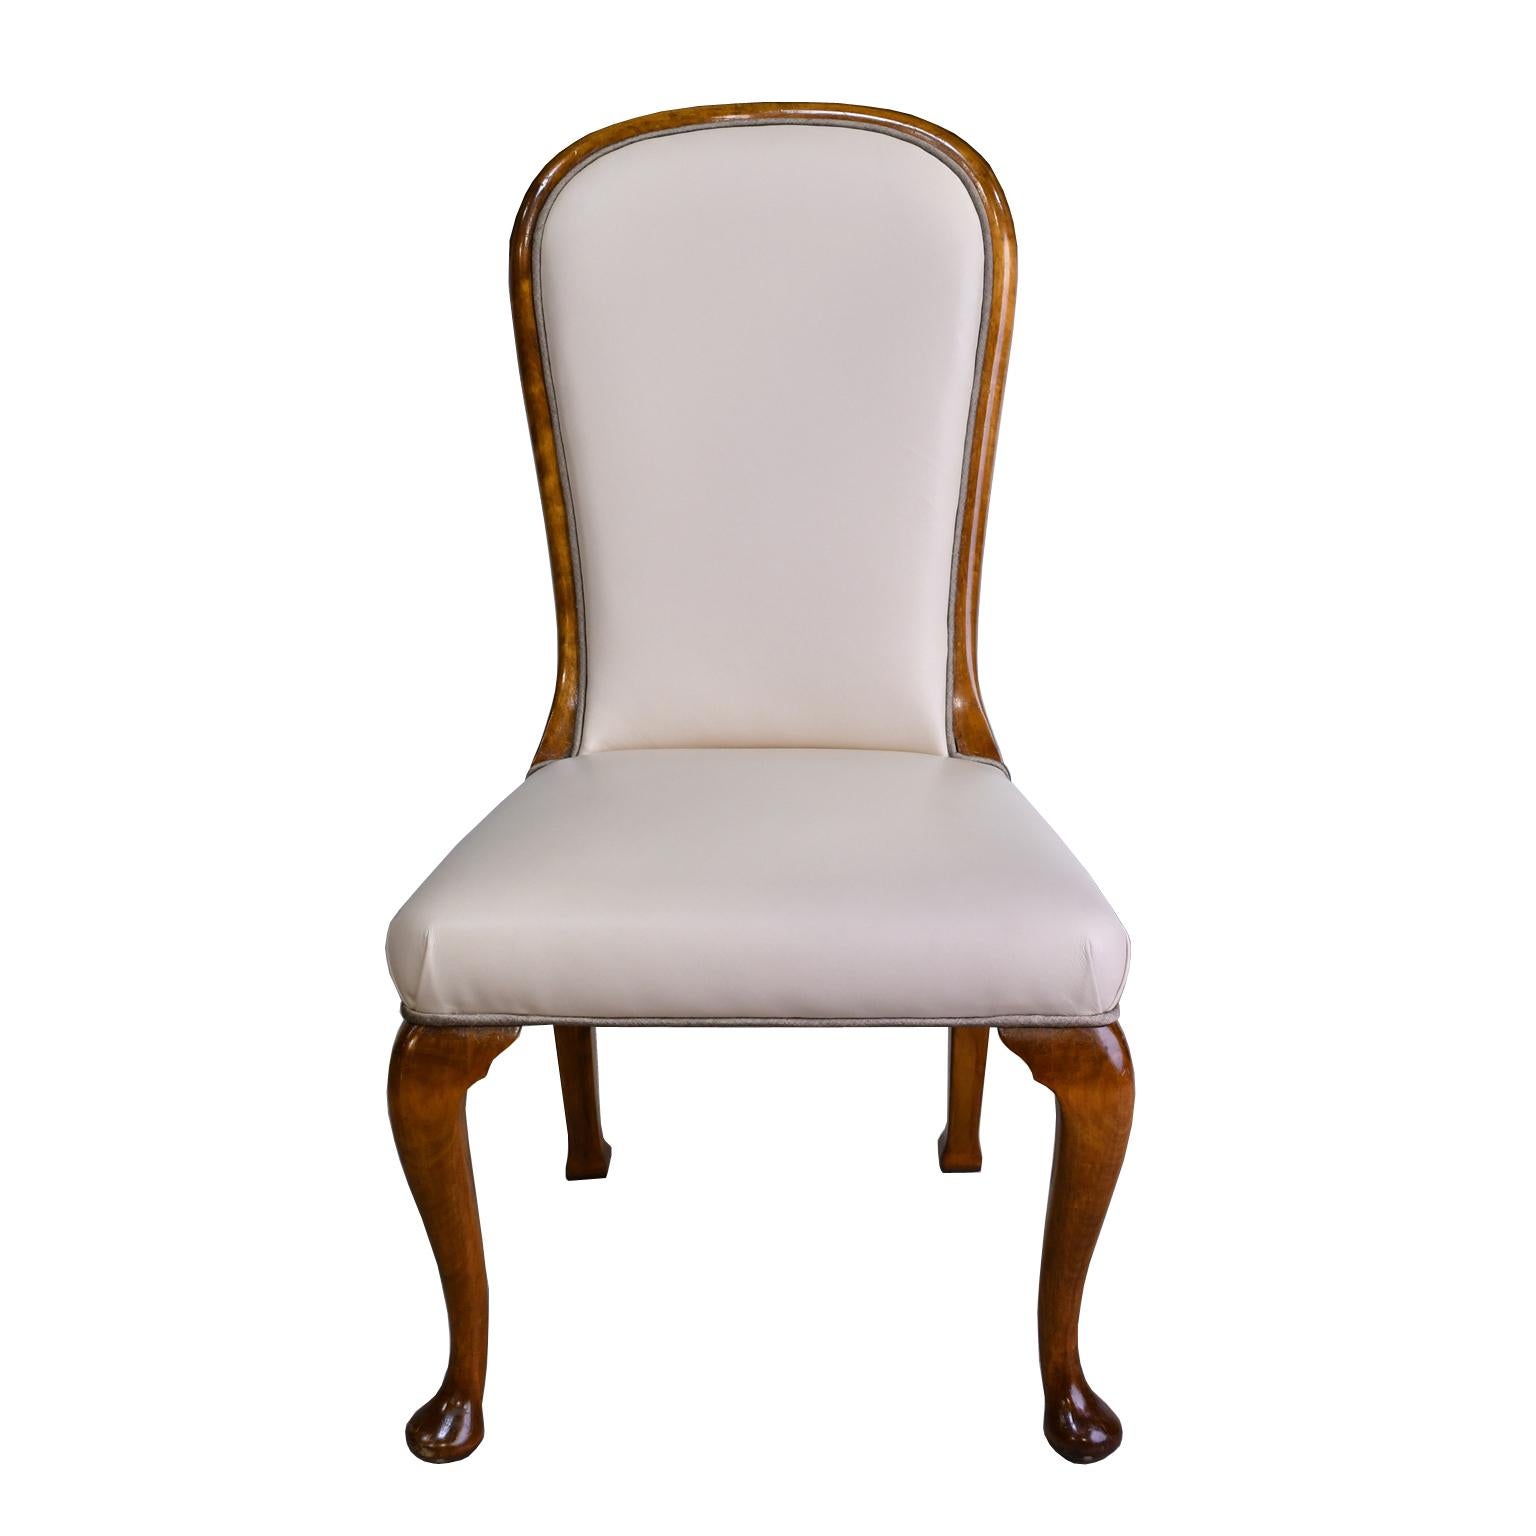 A handsome set of ten (10) dining chairs that comprise two (2) armchairs and eight (8) side chairs with birchwood frames, with high rounded backs and cabriole legs with pad feet. Side chairs are upholstered in a cream-colored leather or faux